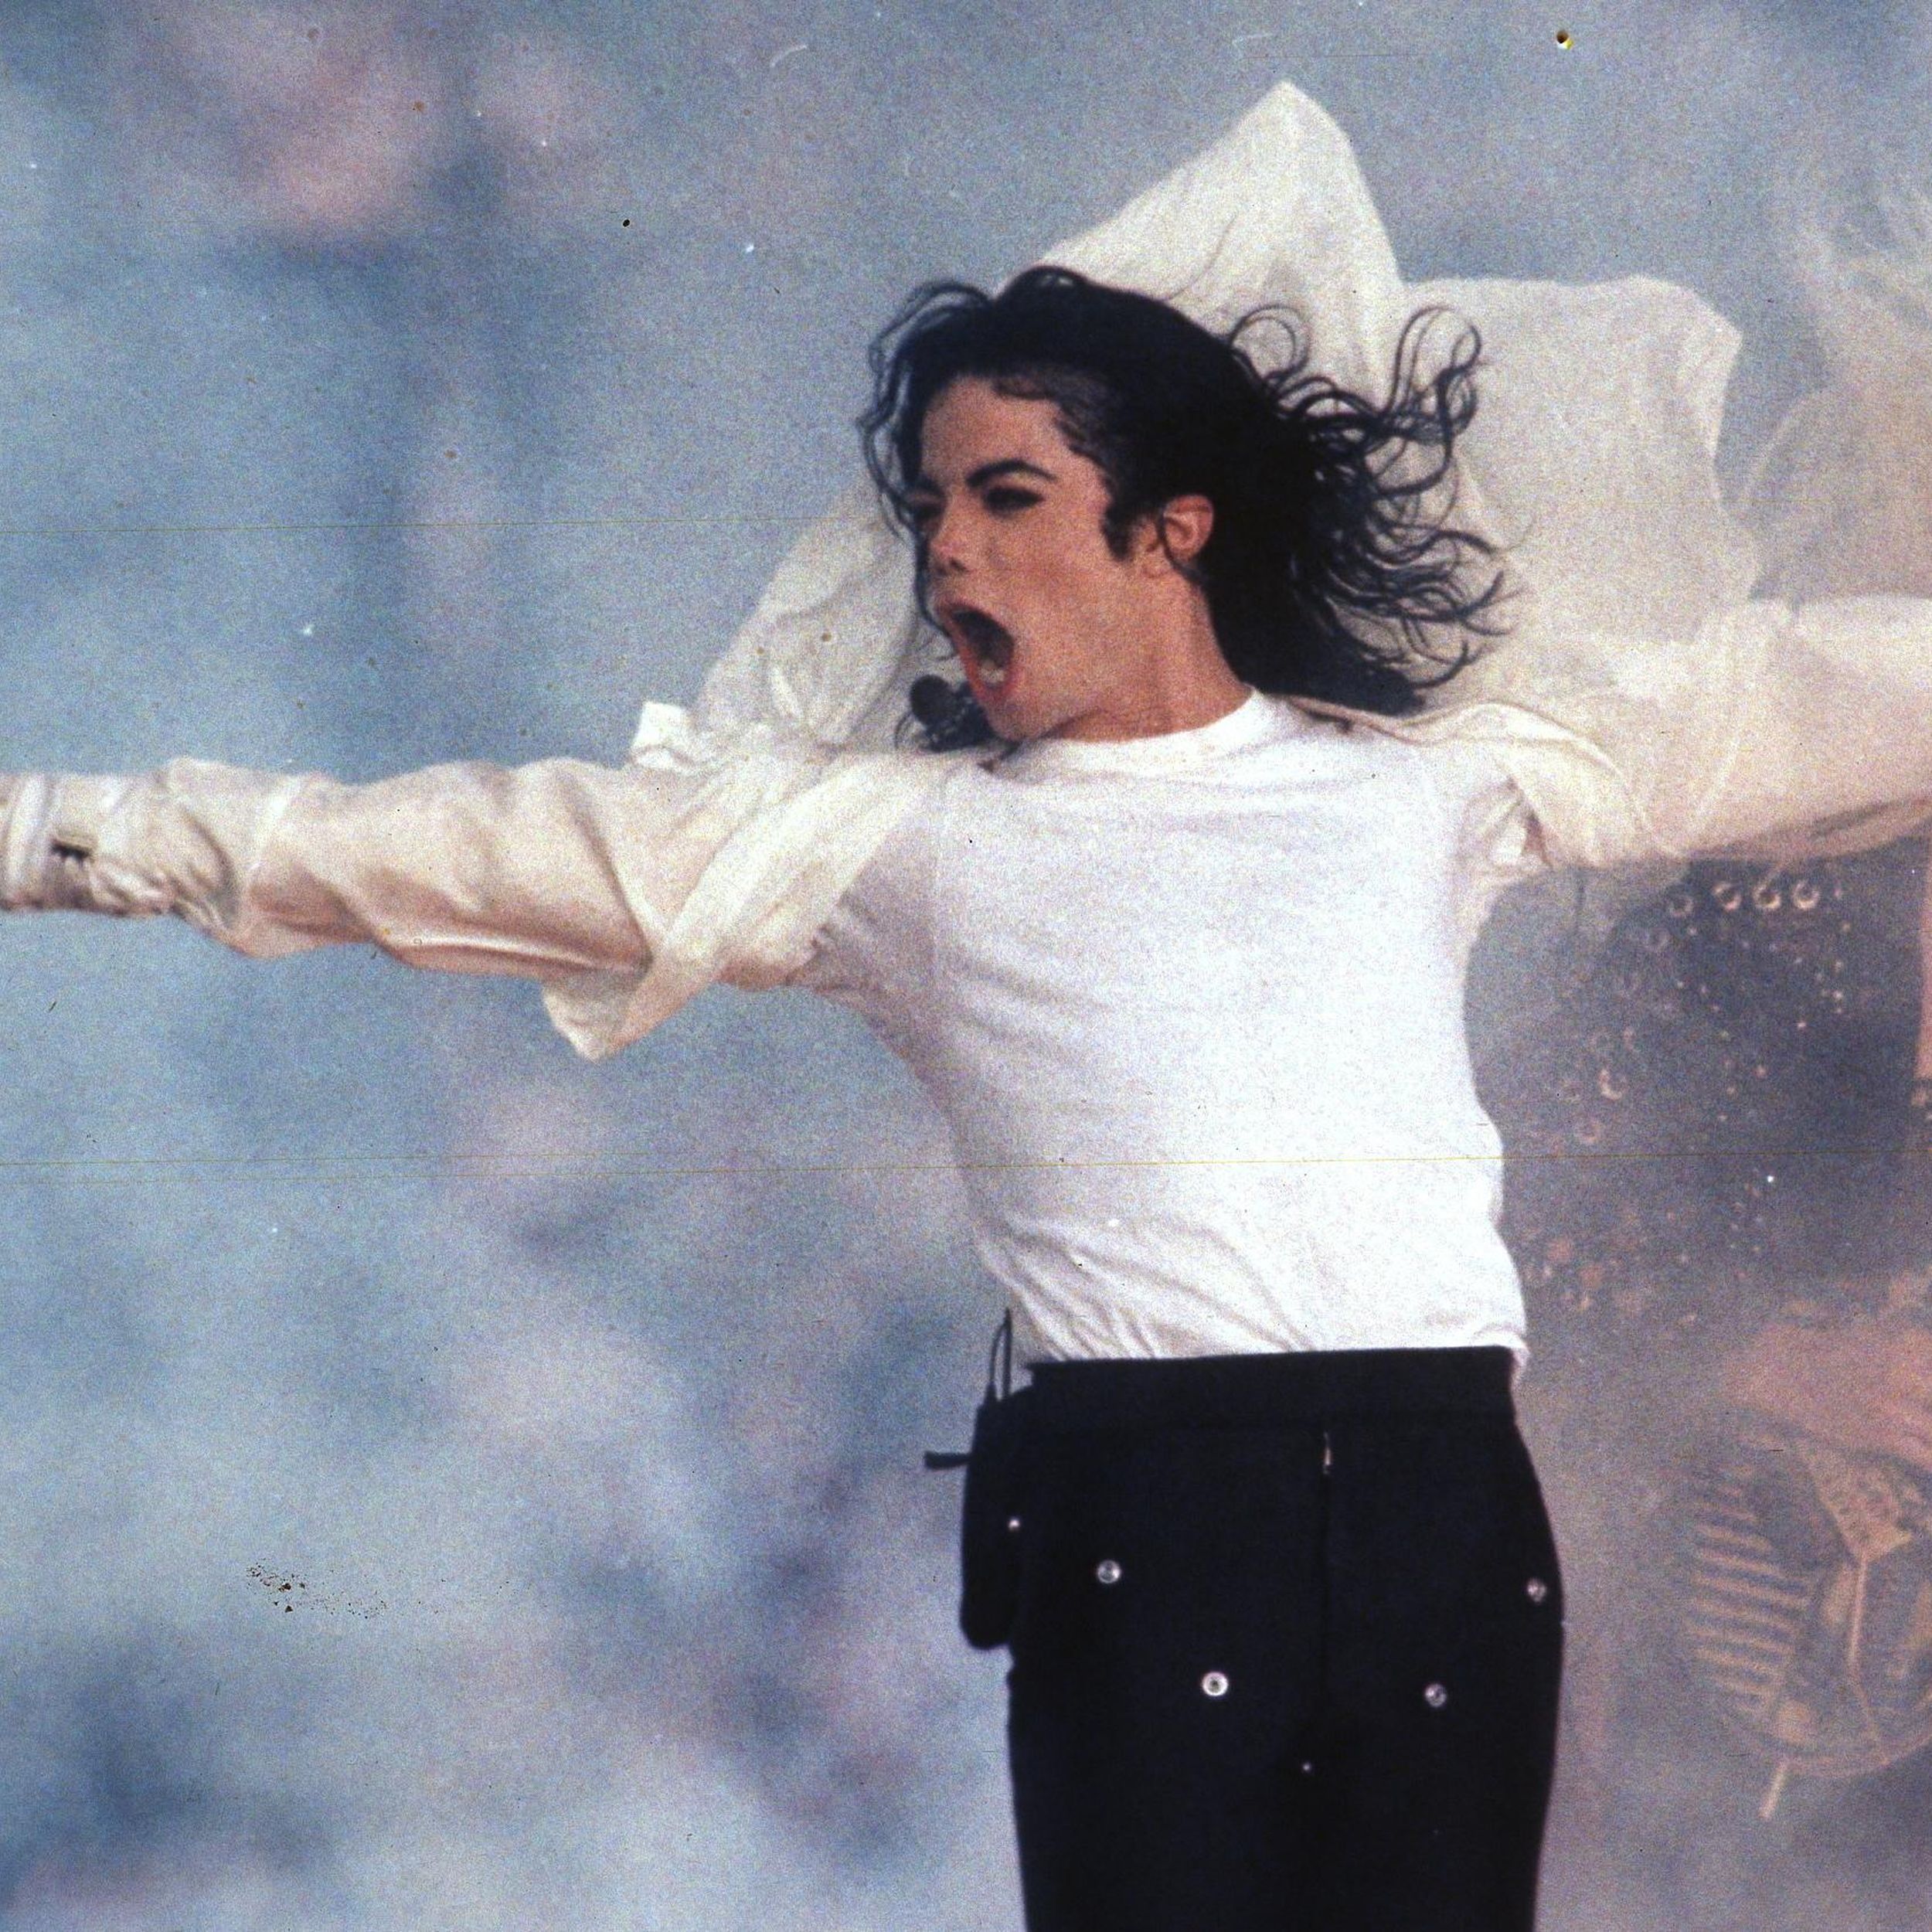 Michael Jackson musical to hit Broadway in 2020 - National